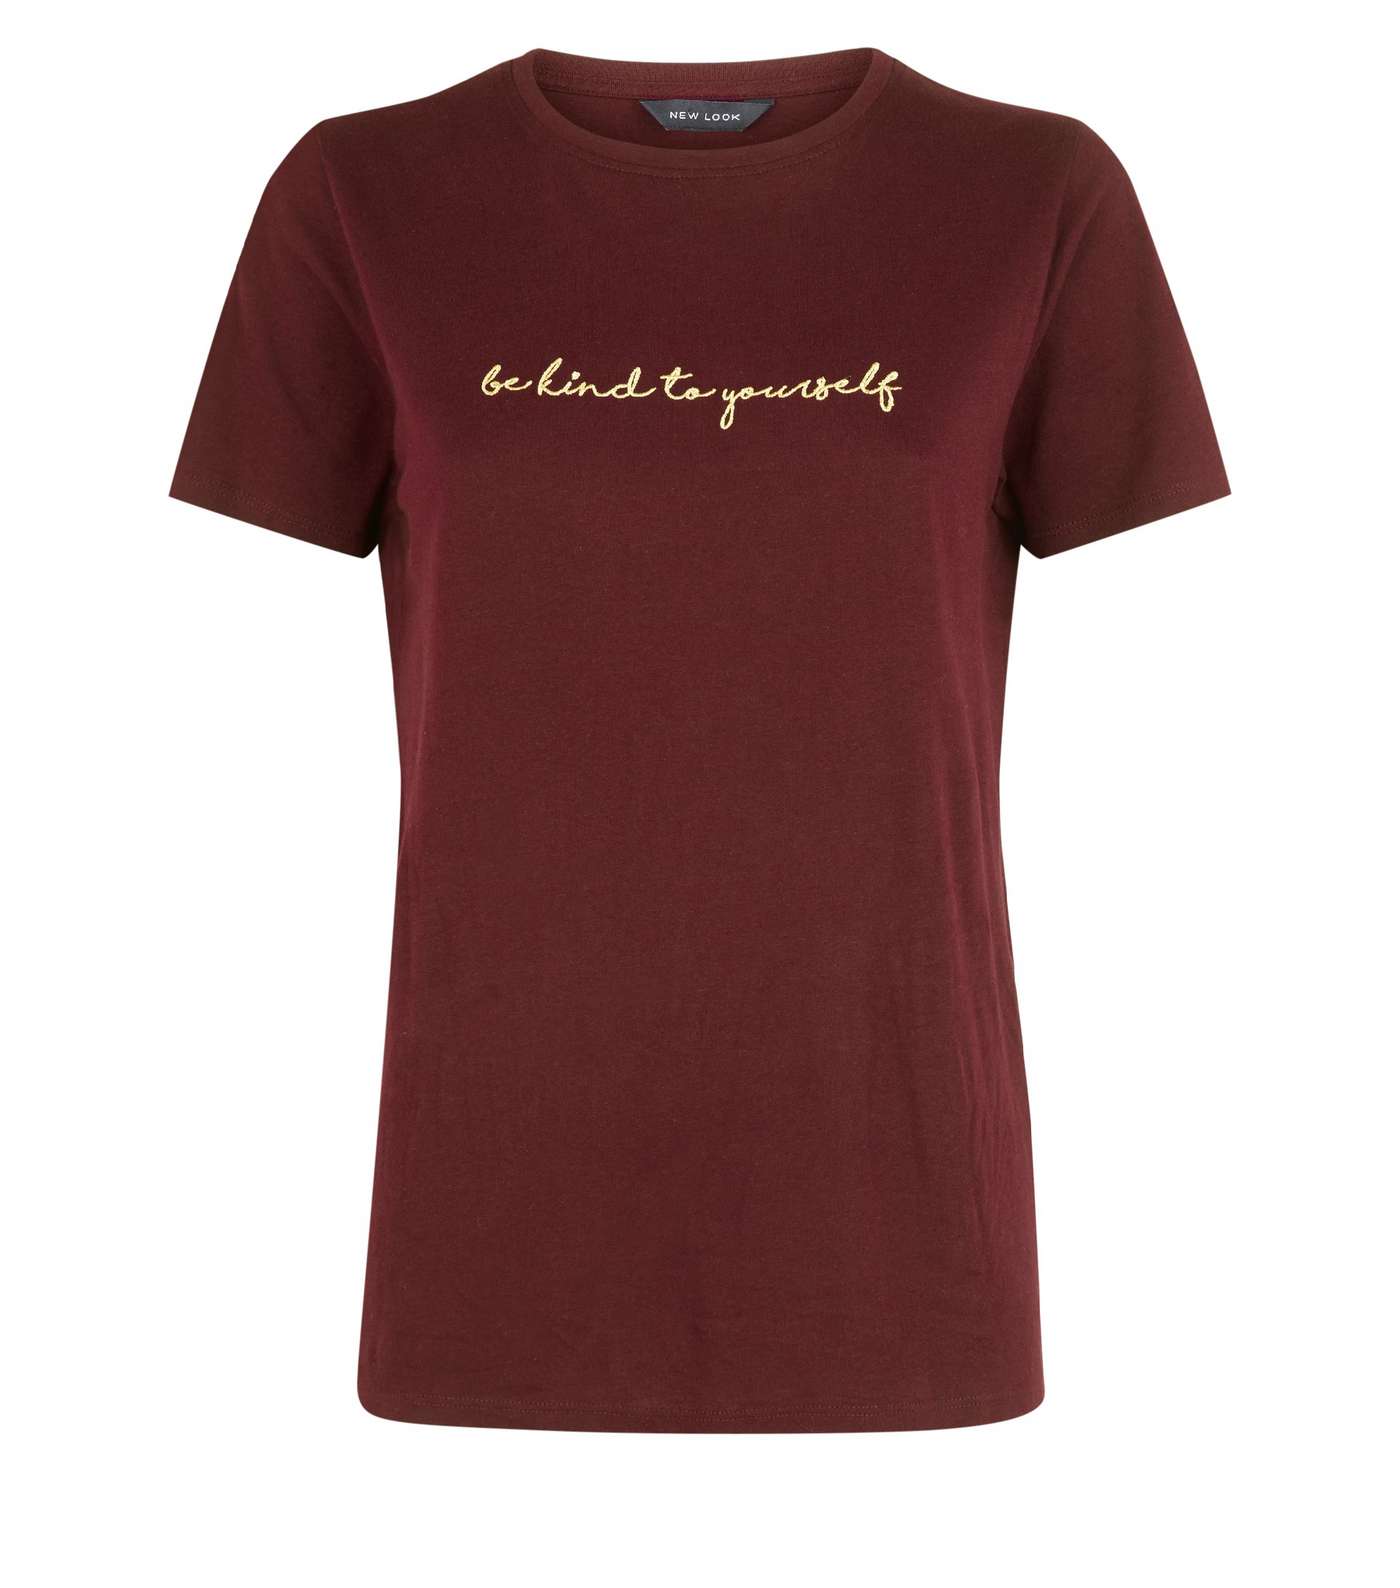 Burgundy Kind To Yourself Embroidered Slogan T-Shirt Image 4